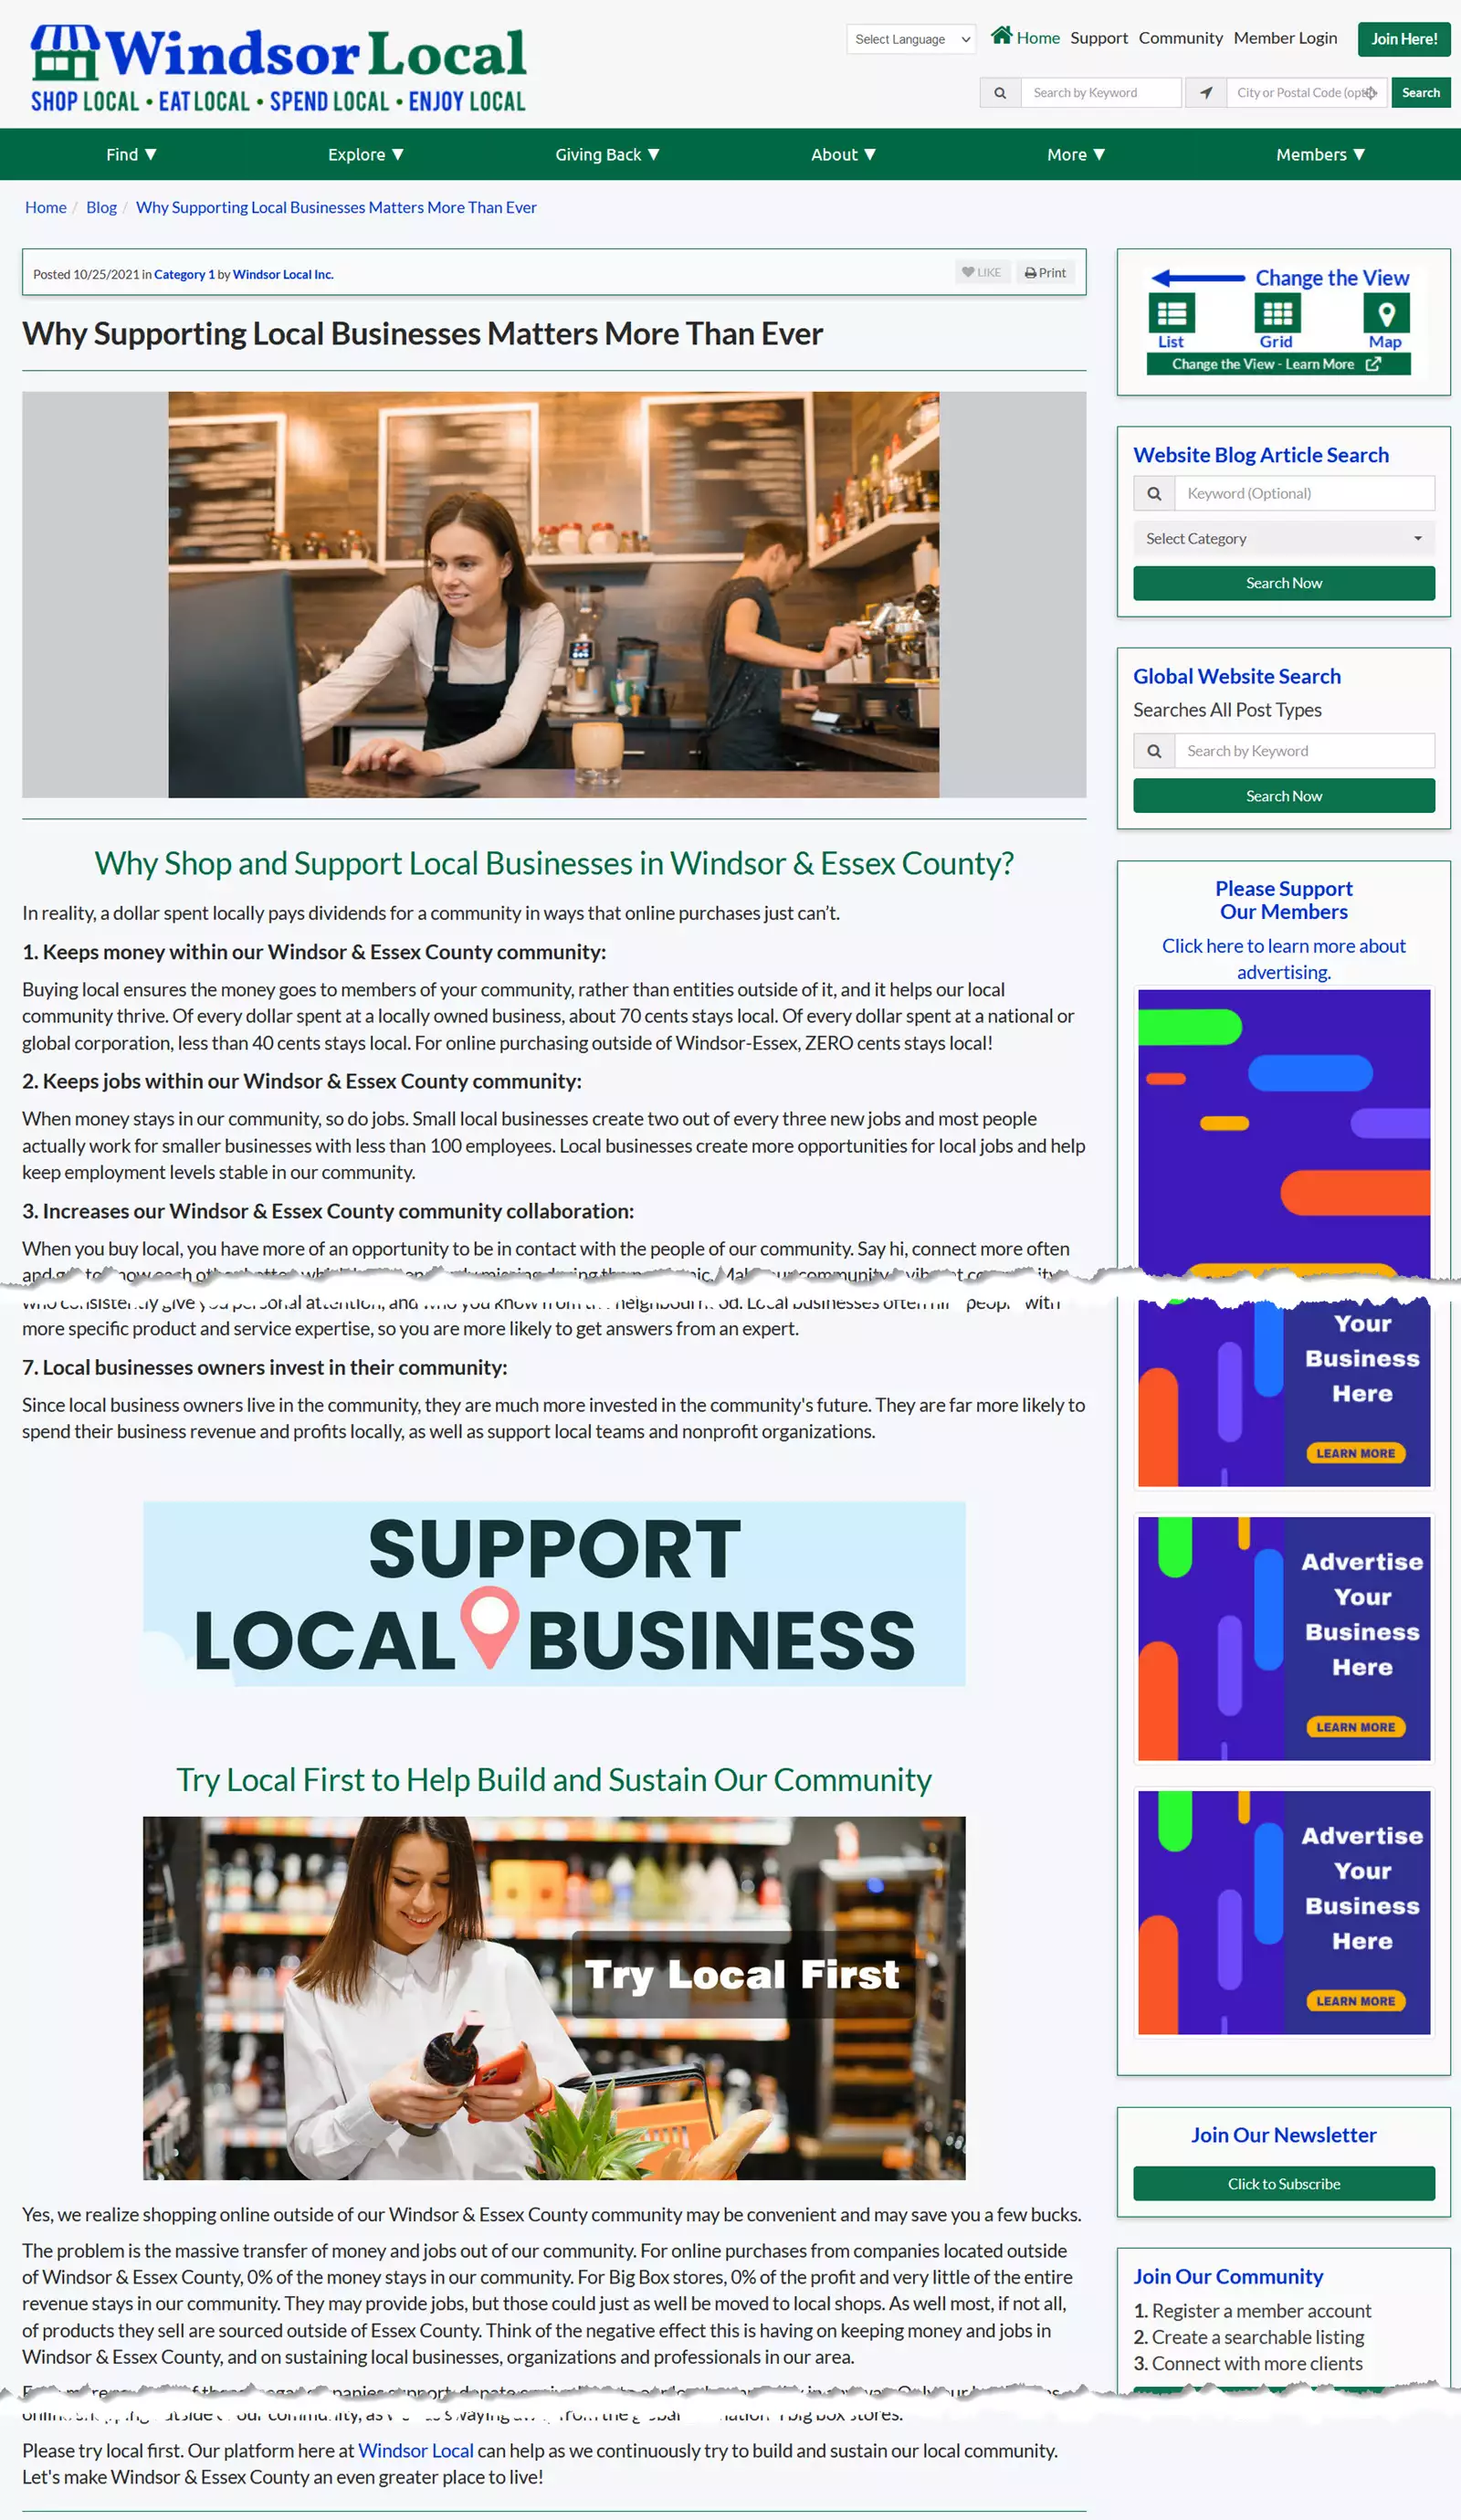 Windsor Local About - Why Local Matters view